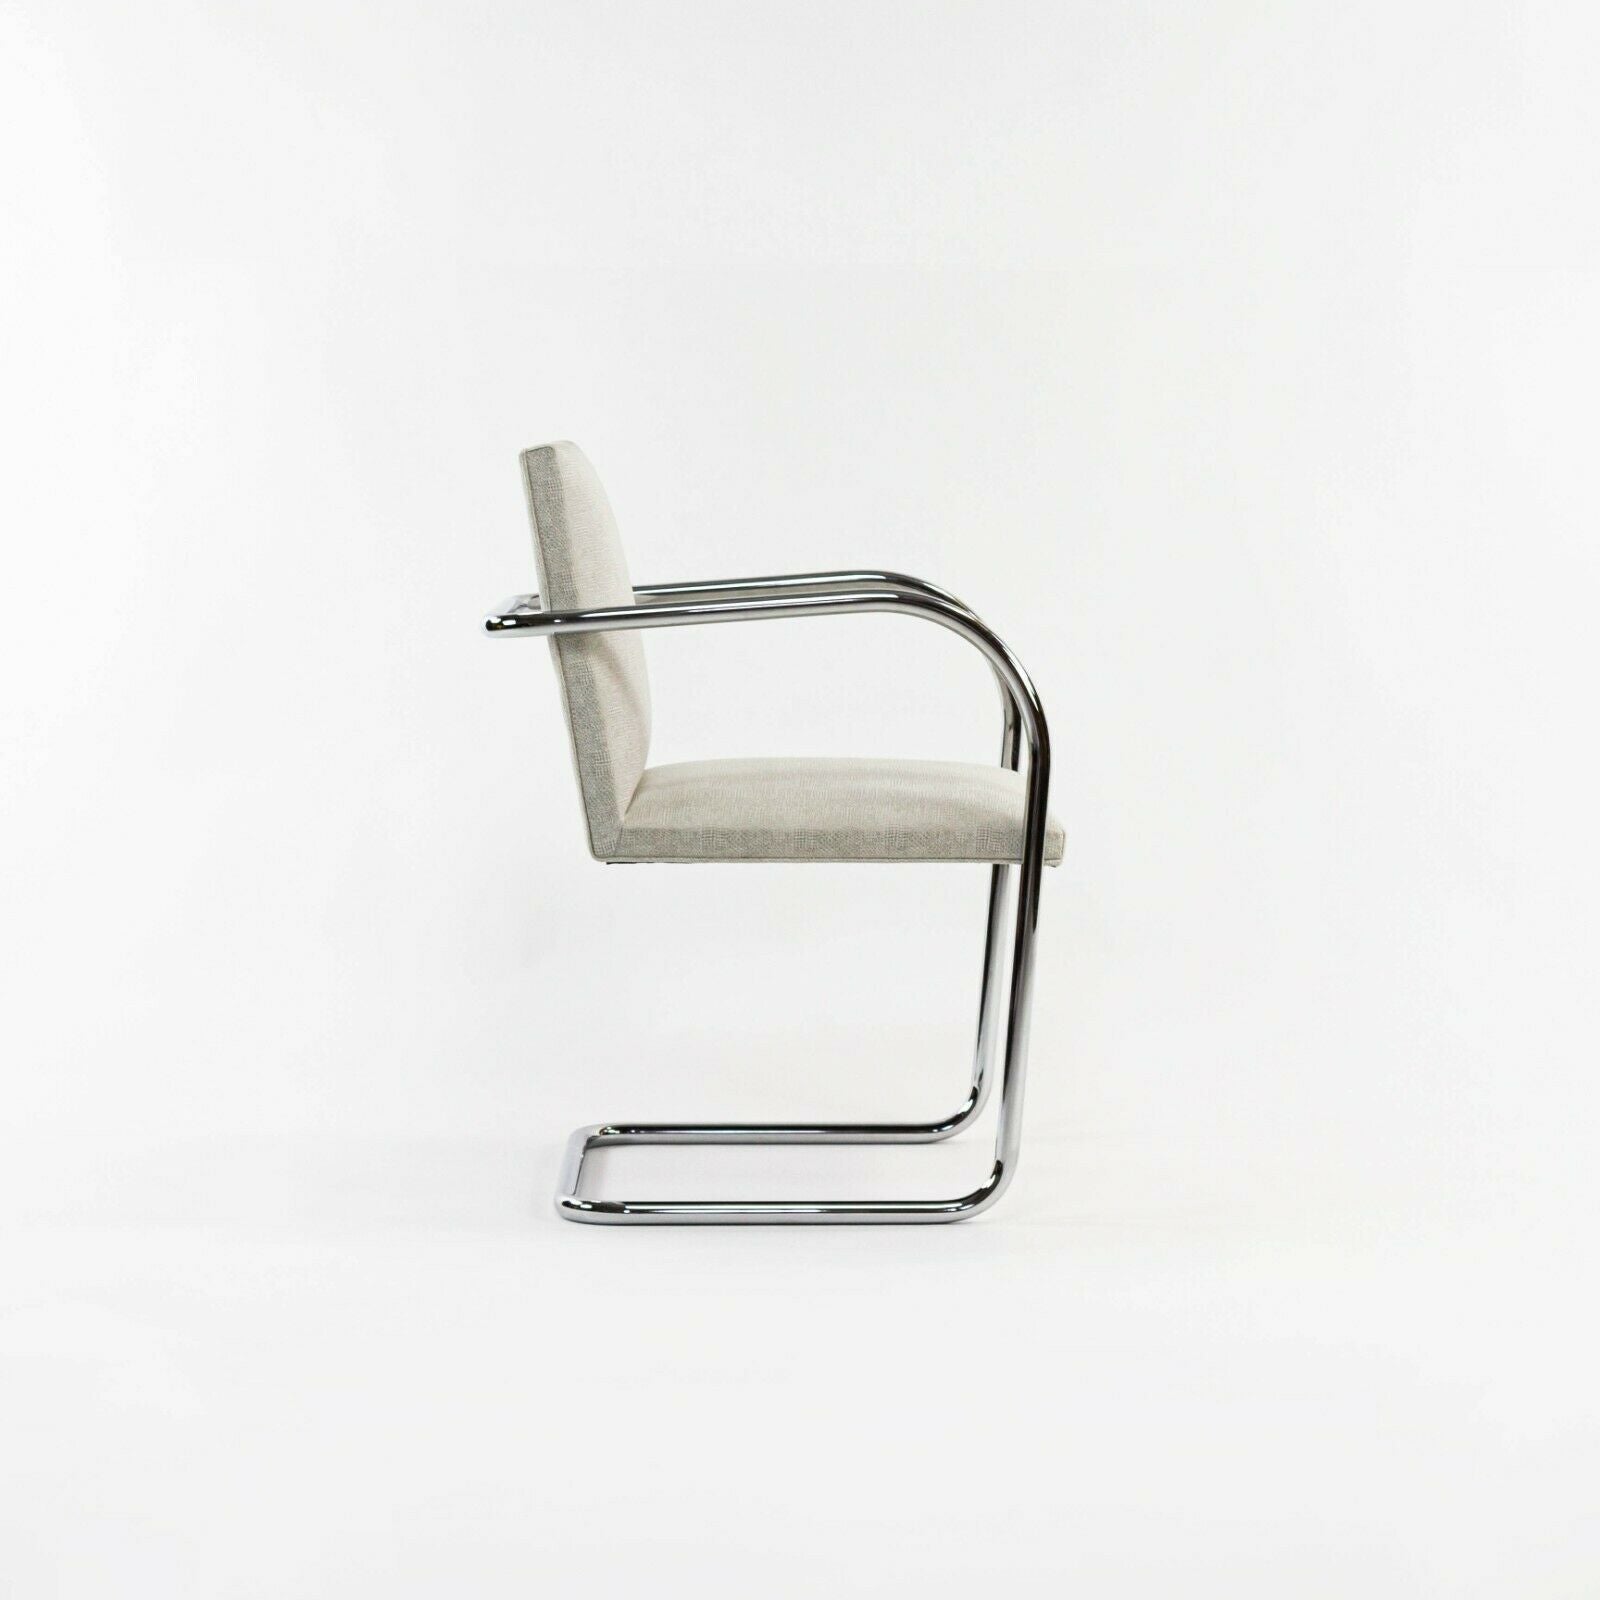 SOLD 2010s Pair of Mies Van Der Rohe for Knoll Tubular Brno Chairs in Gray Fabric